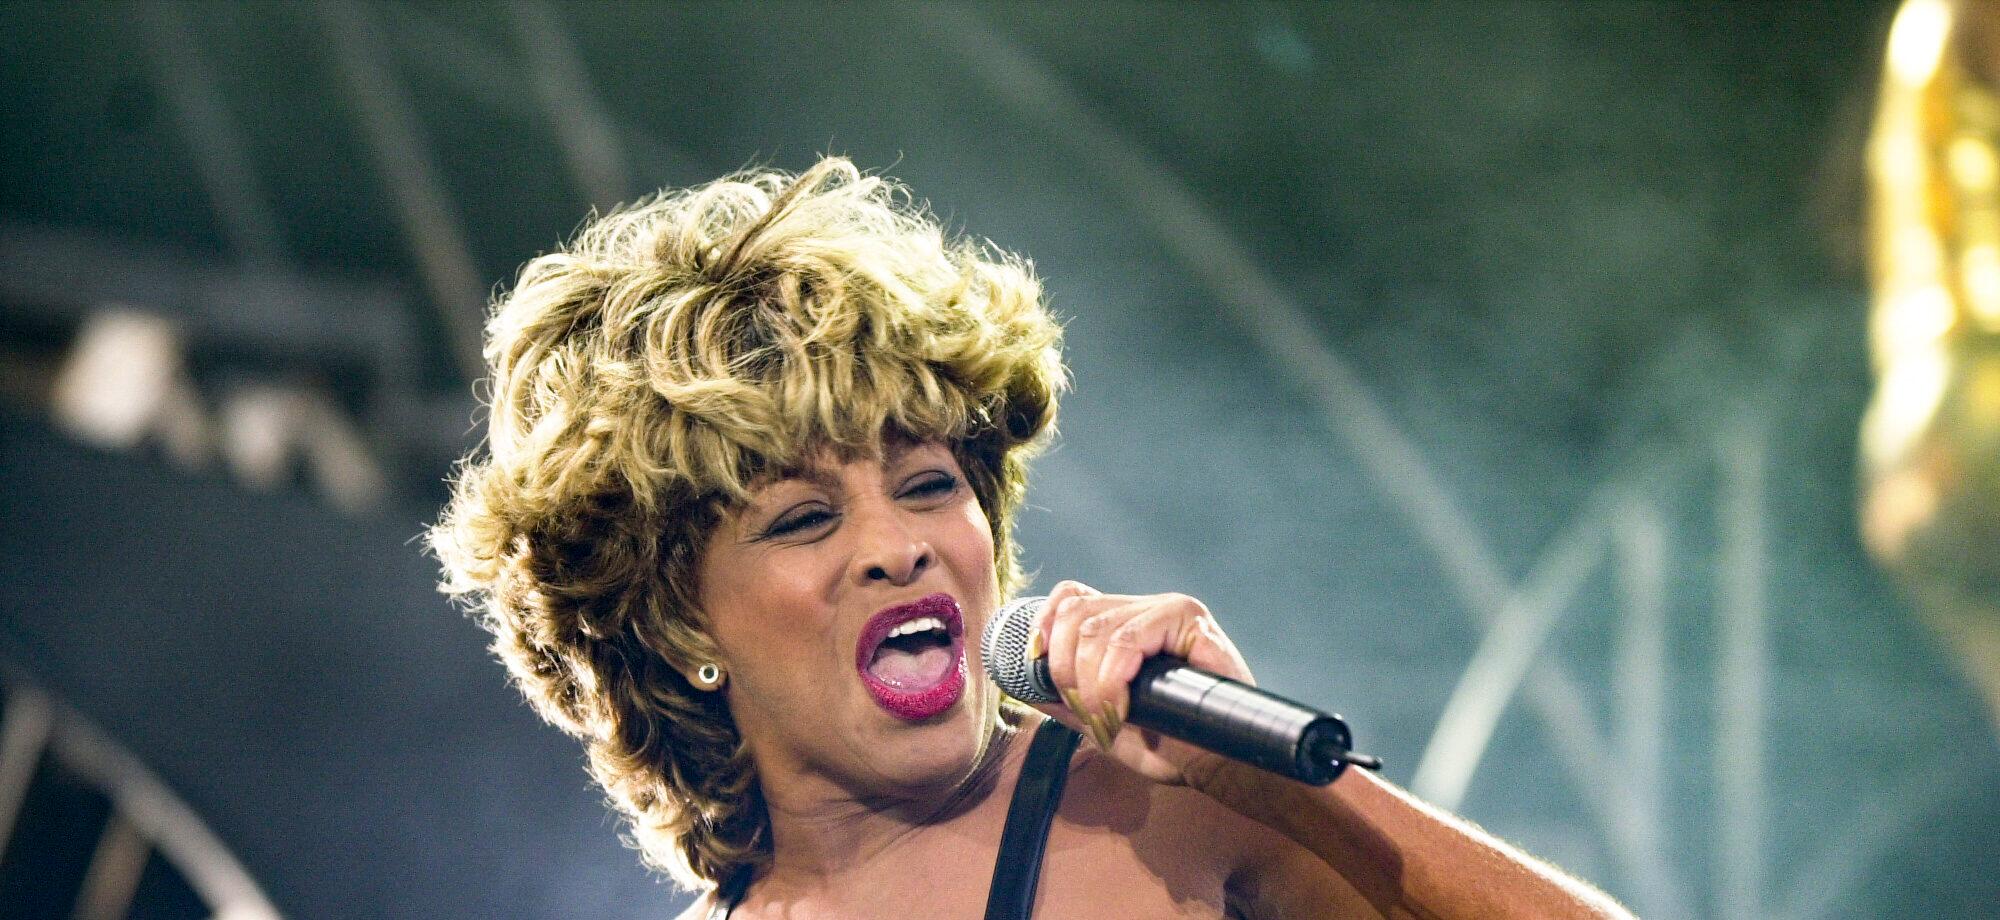 Rolling Stones’ Mick Jagger & Ronnie Wood Pay Tribute To Tina Turner